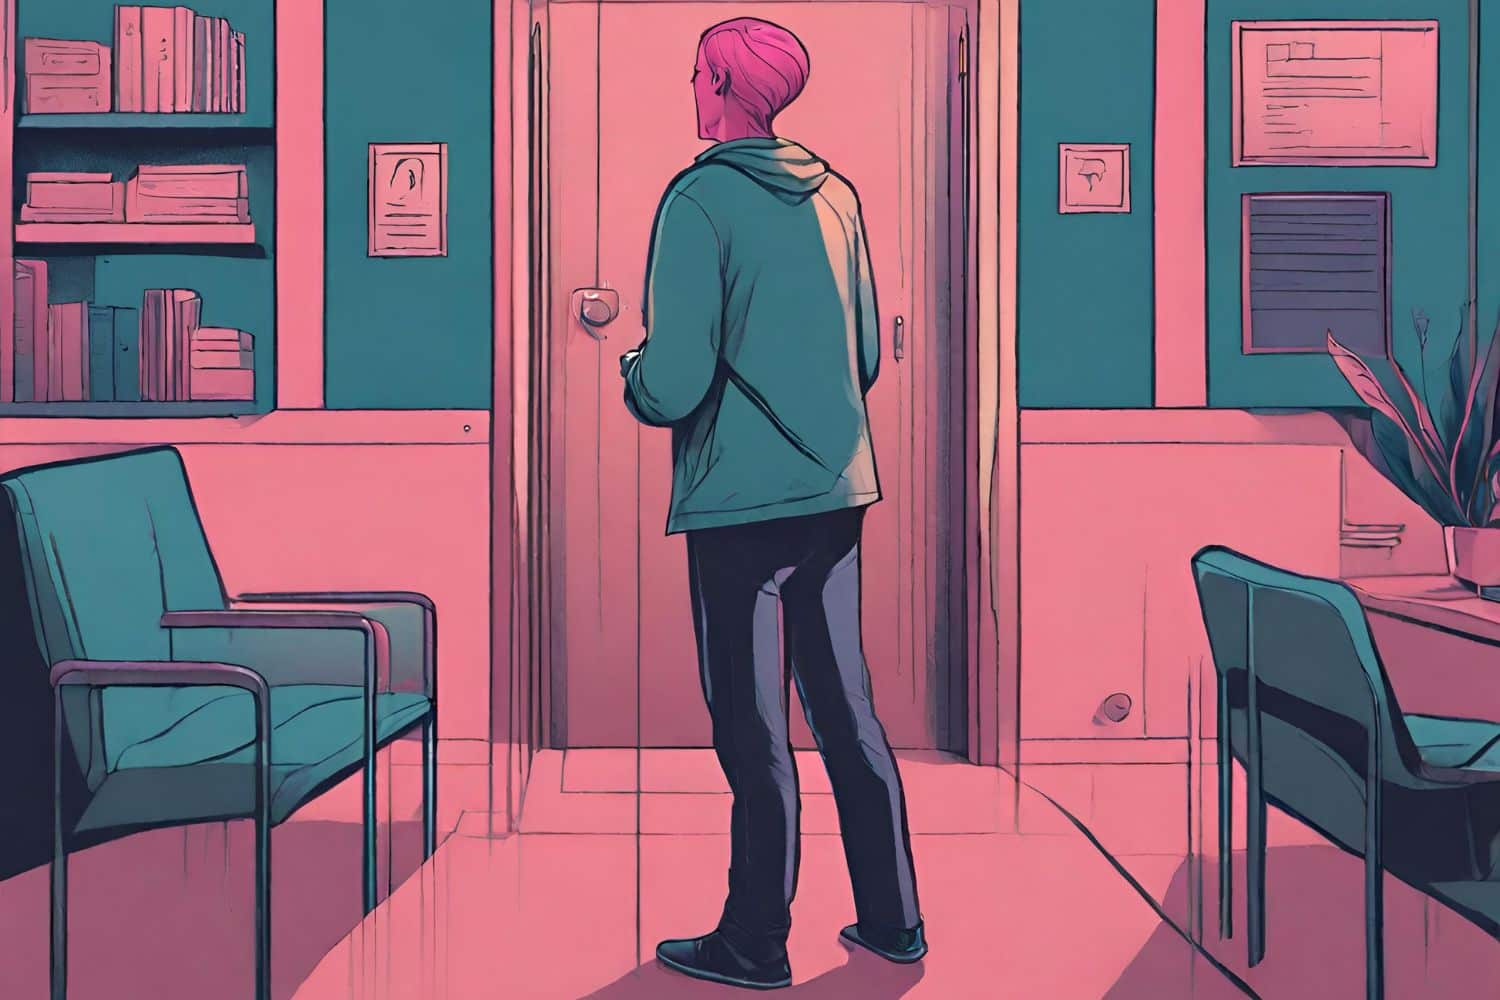 AI-generated concept art of a person stood hesitantly in front of a therapist's door